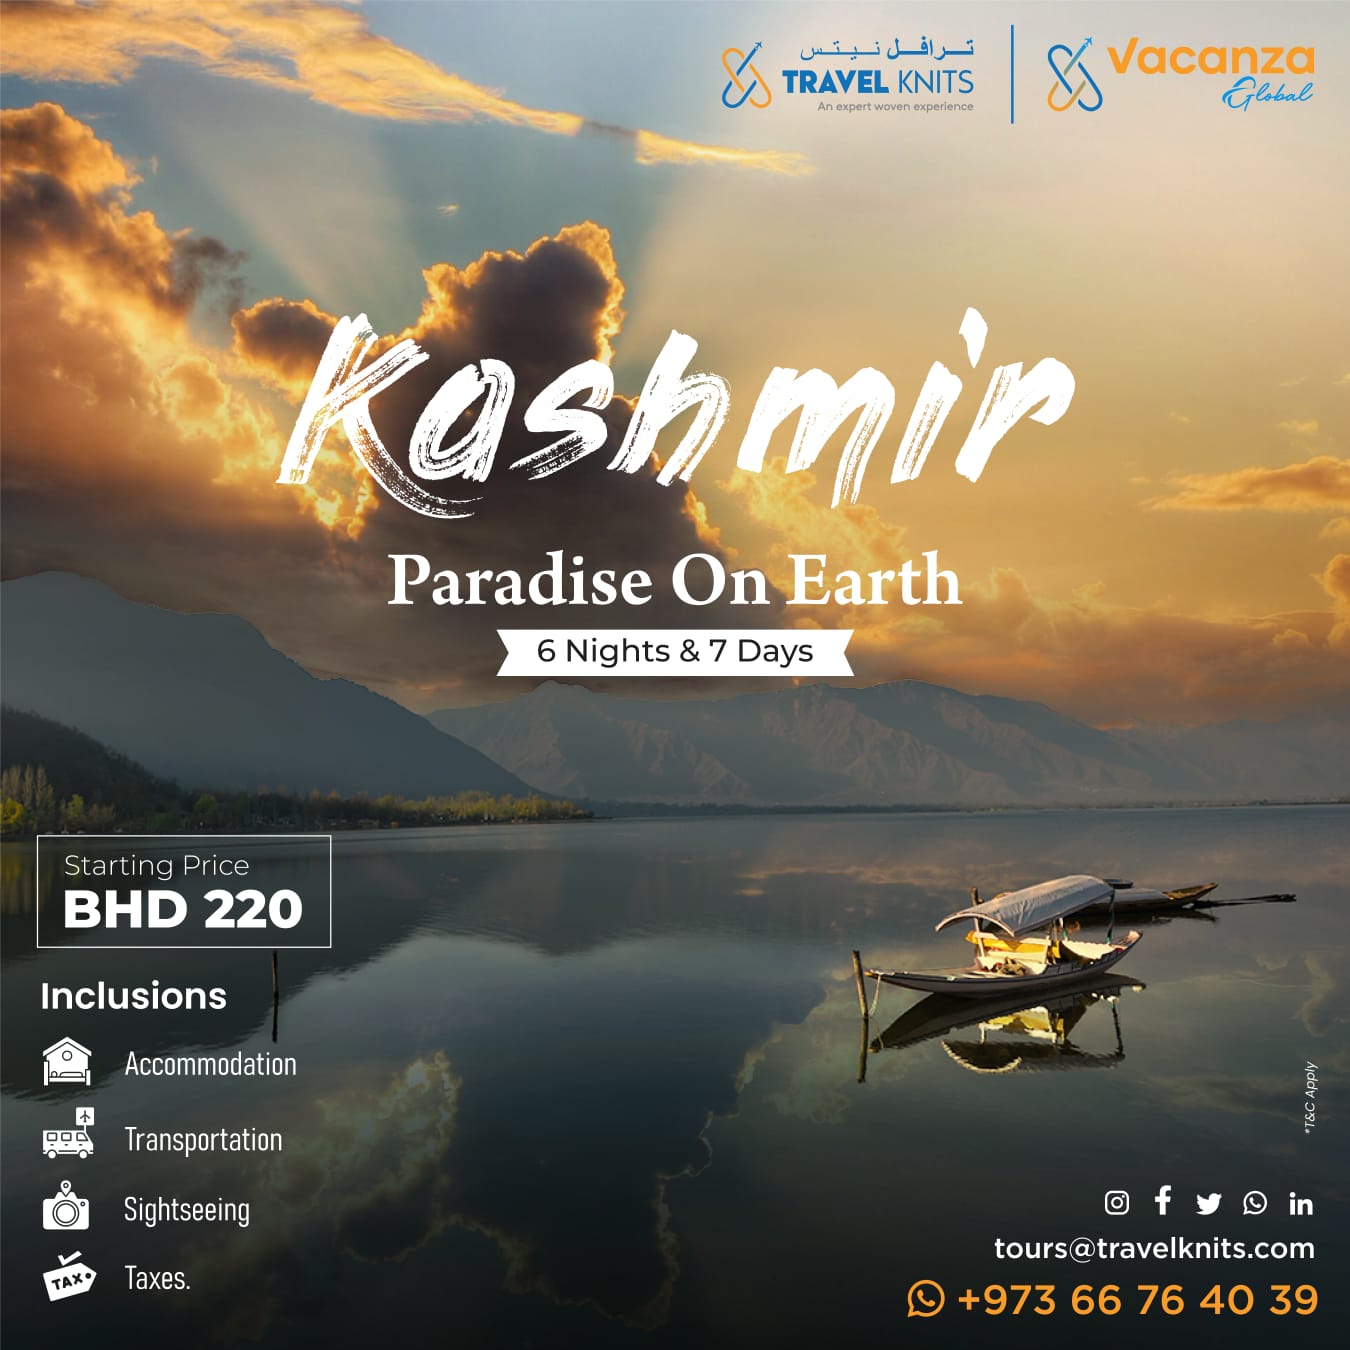 Kashmir paradise on earthTour Packages - Book honeymoon ,family,adventure tour packages to Kashmir paradise on earth|Travel Knits